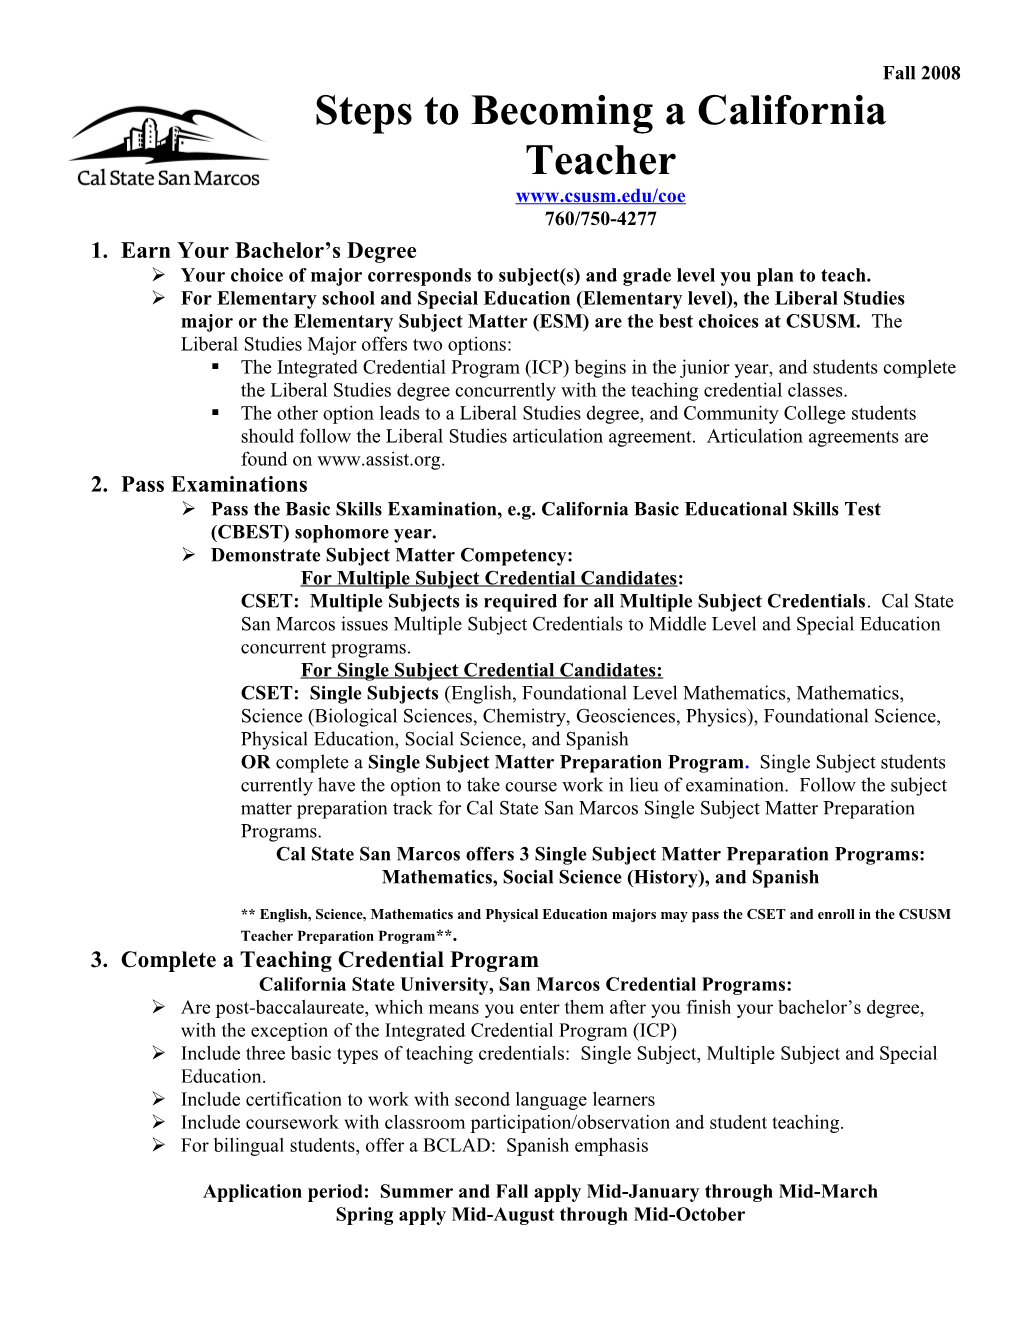 What Do I Need to Become a Teacher in California